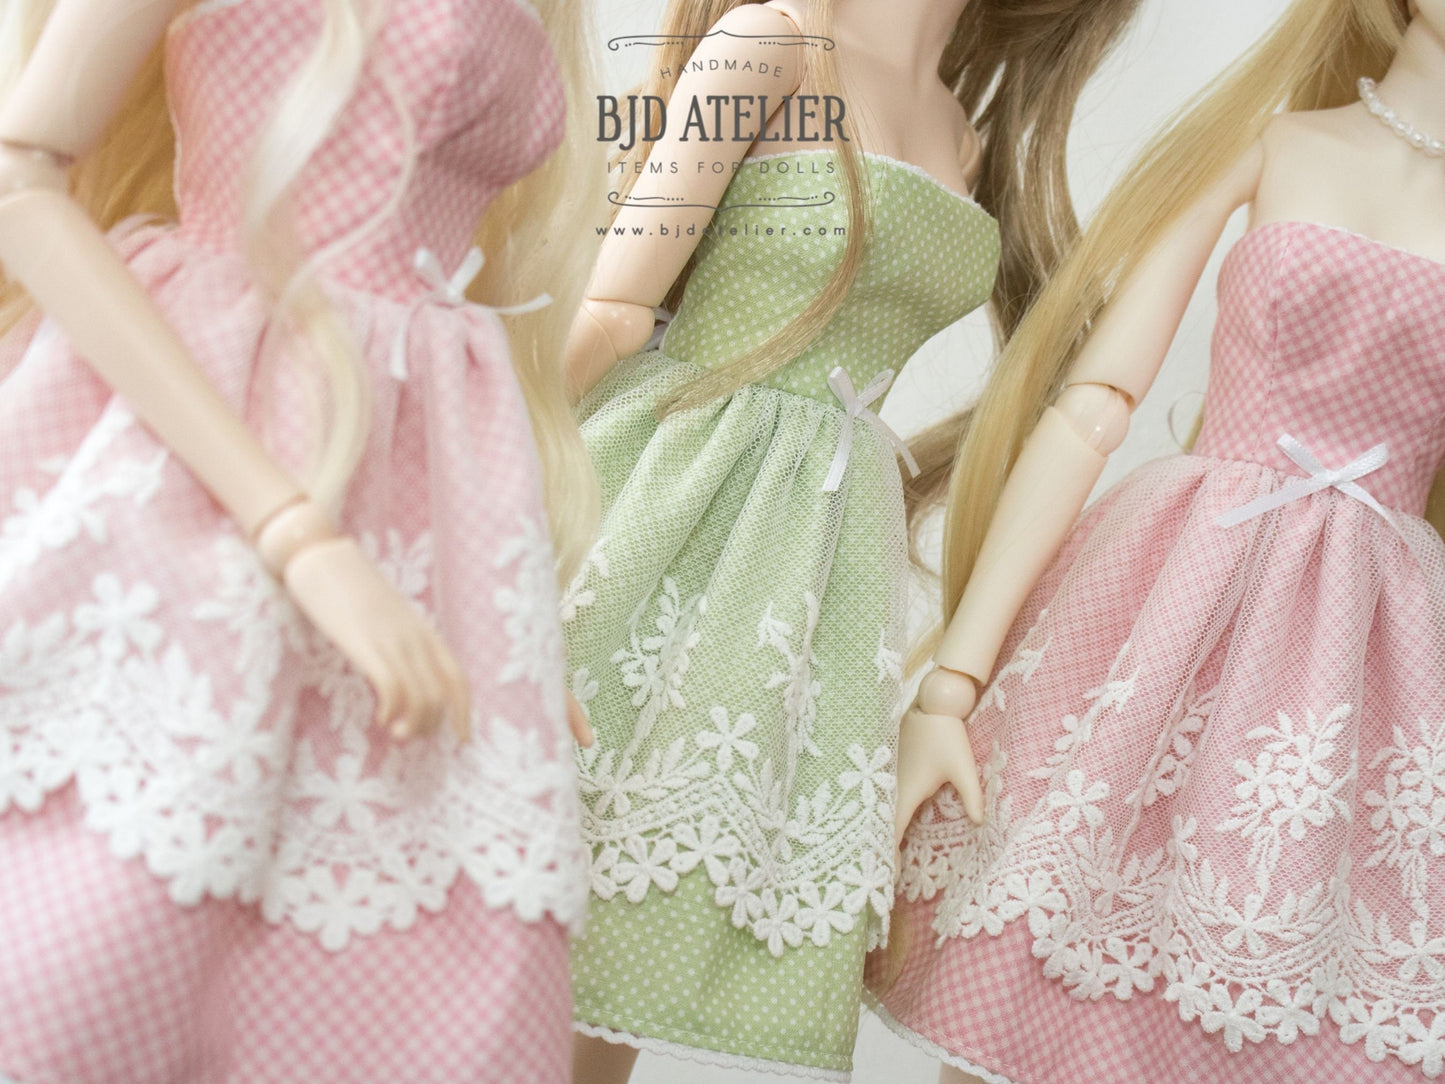 Dress Sewing Pattern for Dolls | Print at Home PDF Pattern for Smart Doll Dollfie Dreams 1/3 60cm SD Dolls